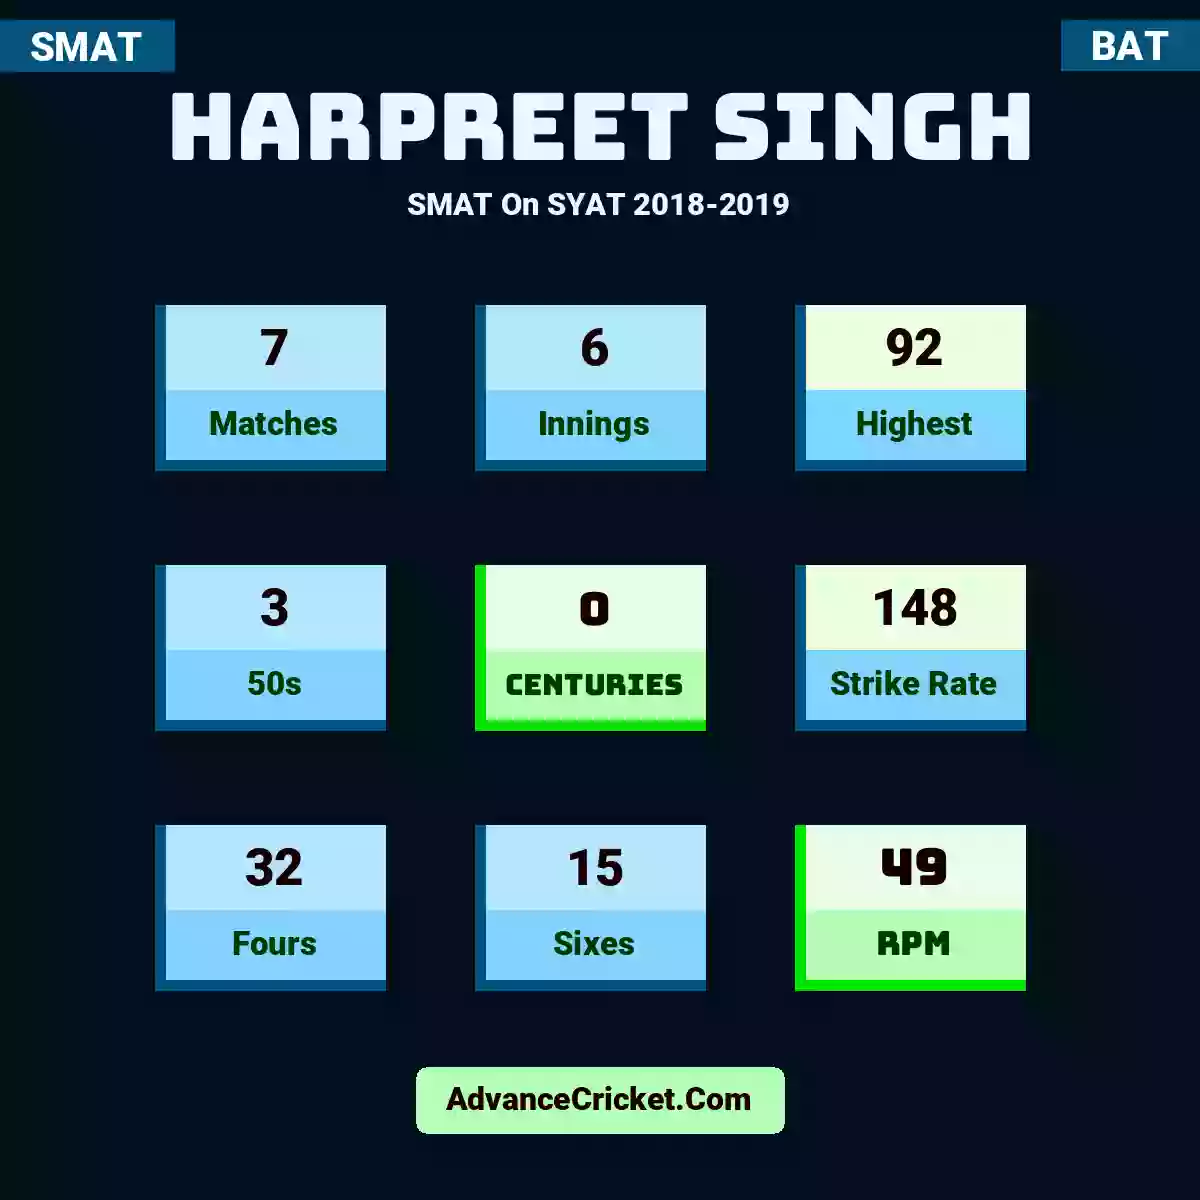 Harpreet Singh SMAT  On SYAT 2018-2019, Harpreet Singh played 7 matches, scored 92 runs as highest, 3 half-centuries, and 0 centuries, with a strike rate of 148. H.Singh hit 32 fours and 15 sixes, with an RPM of 49.